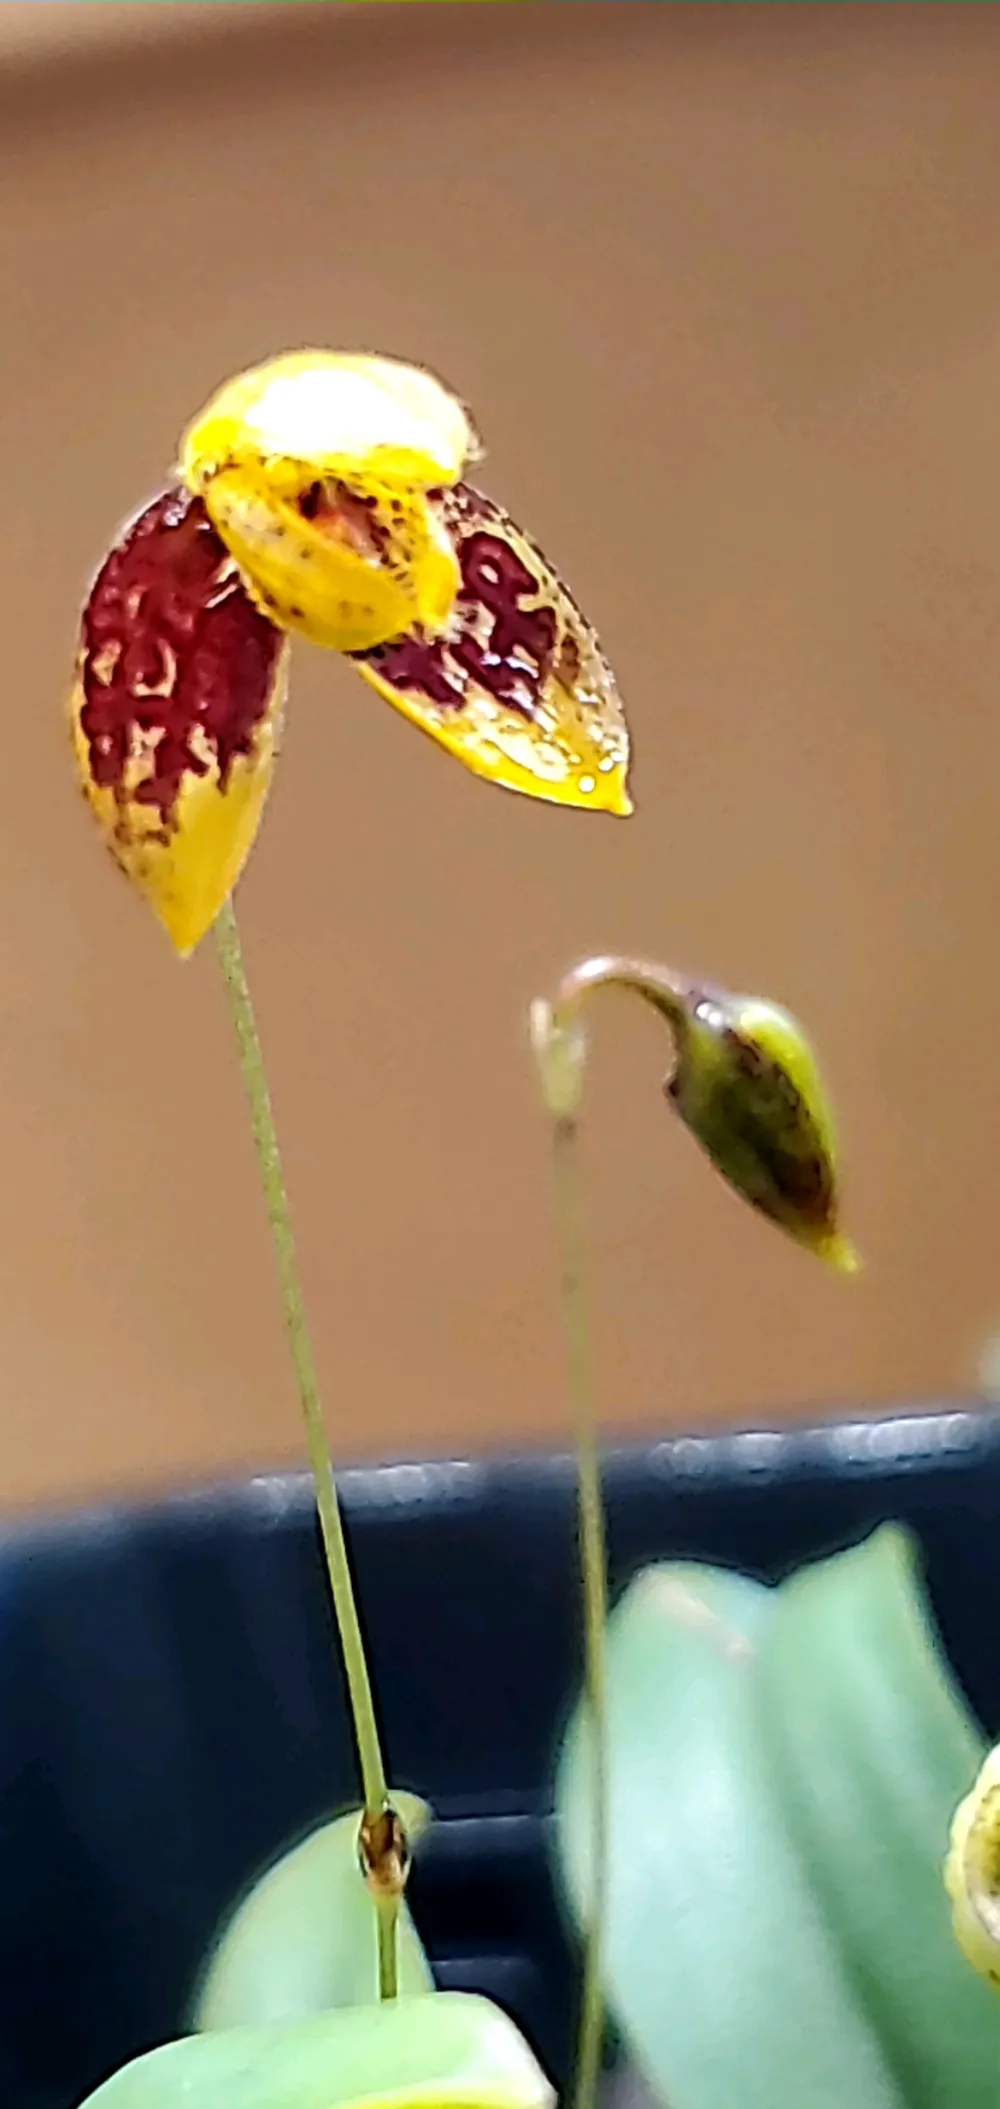 Main image of the orchid for sale